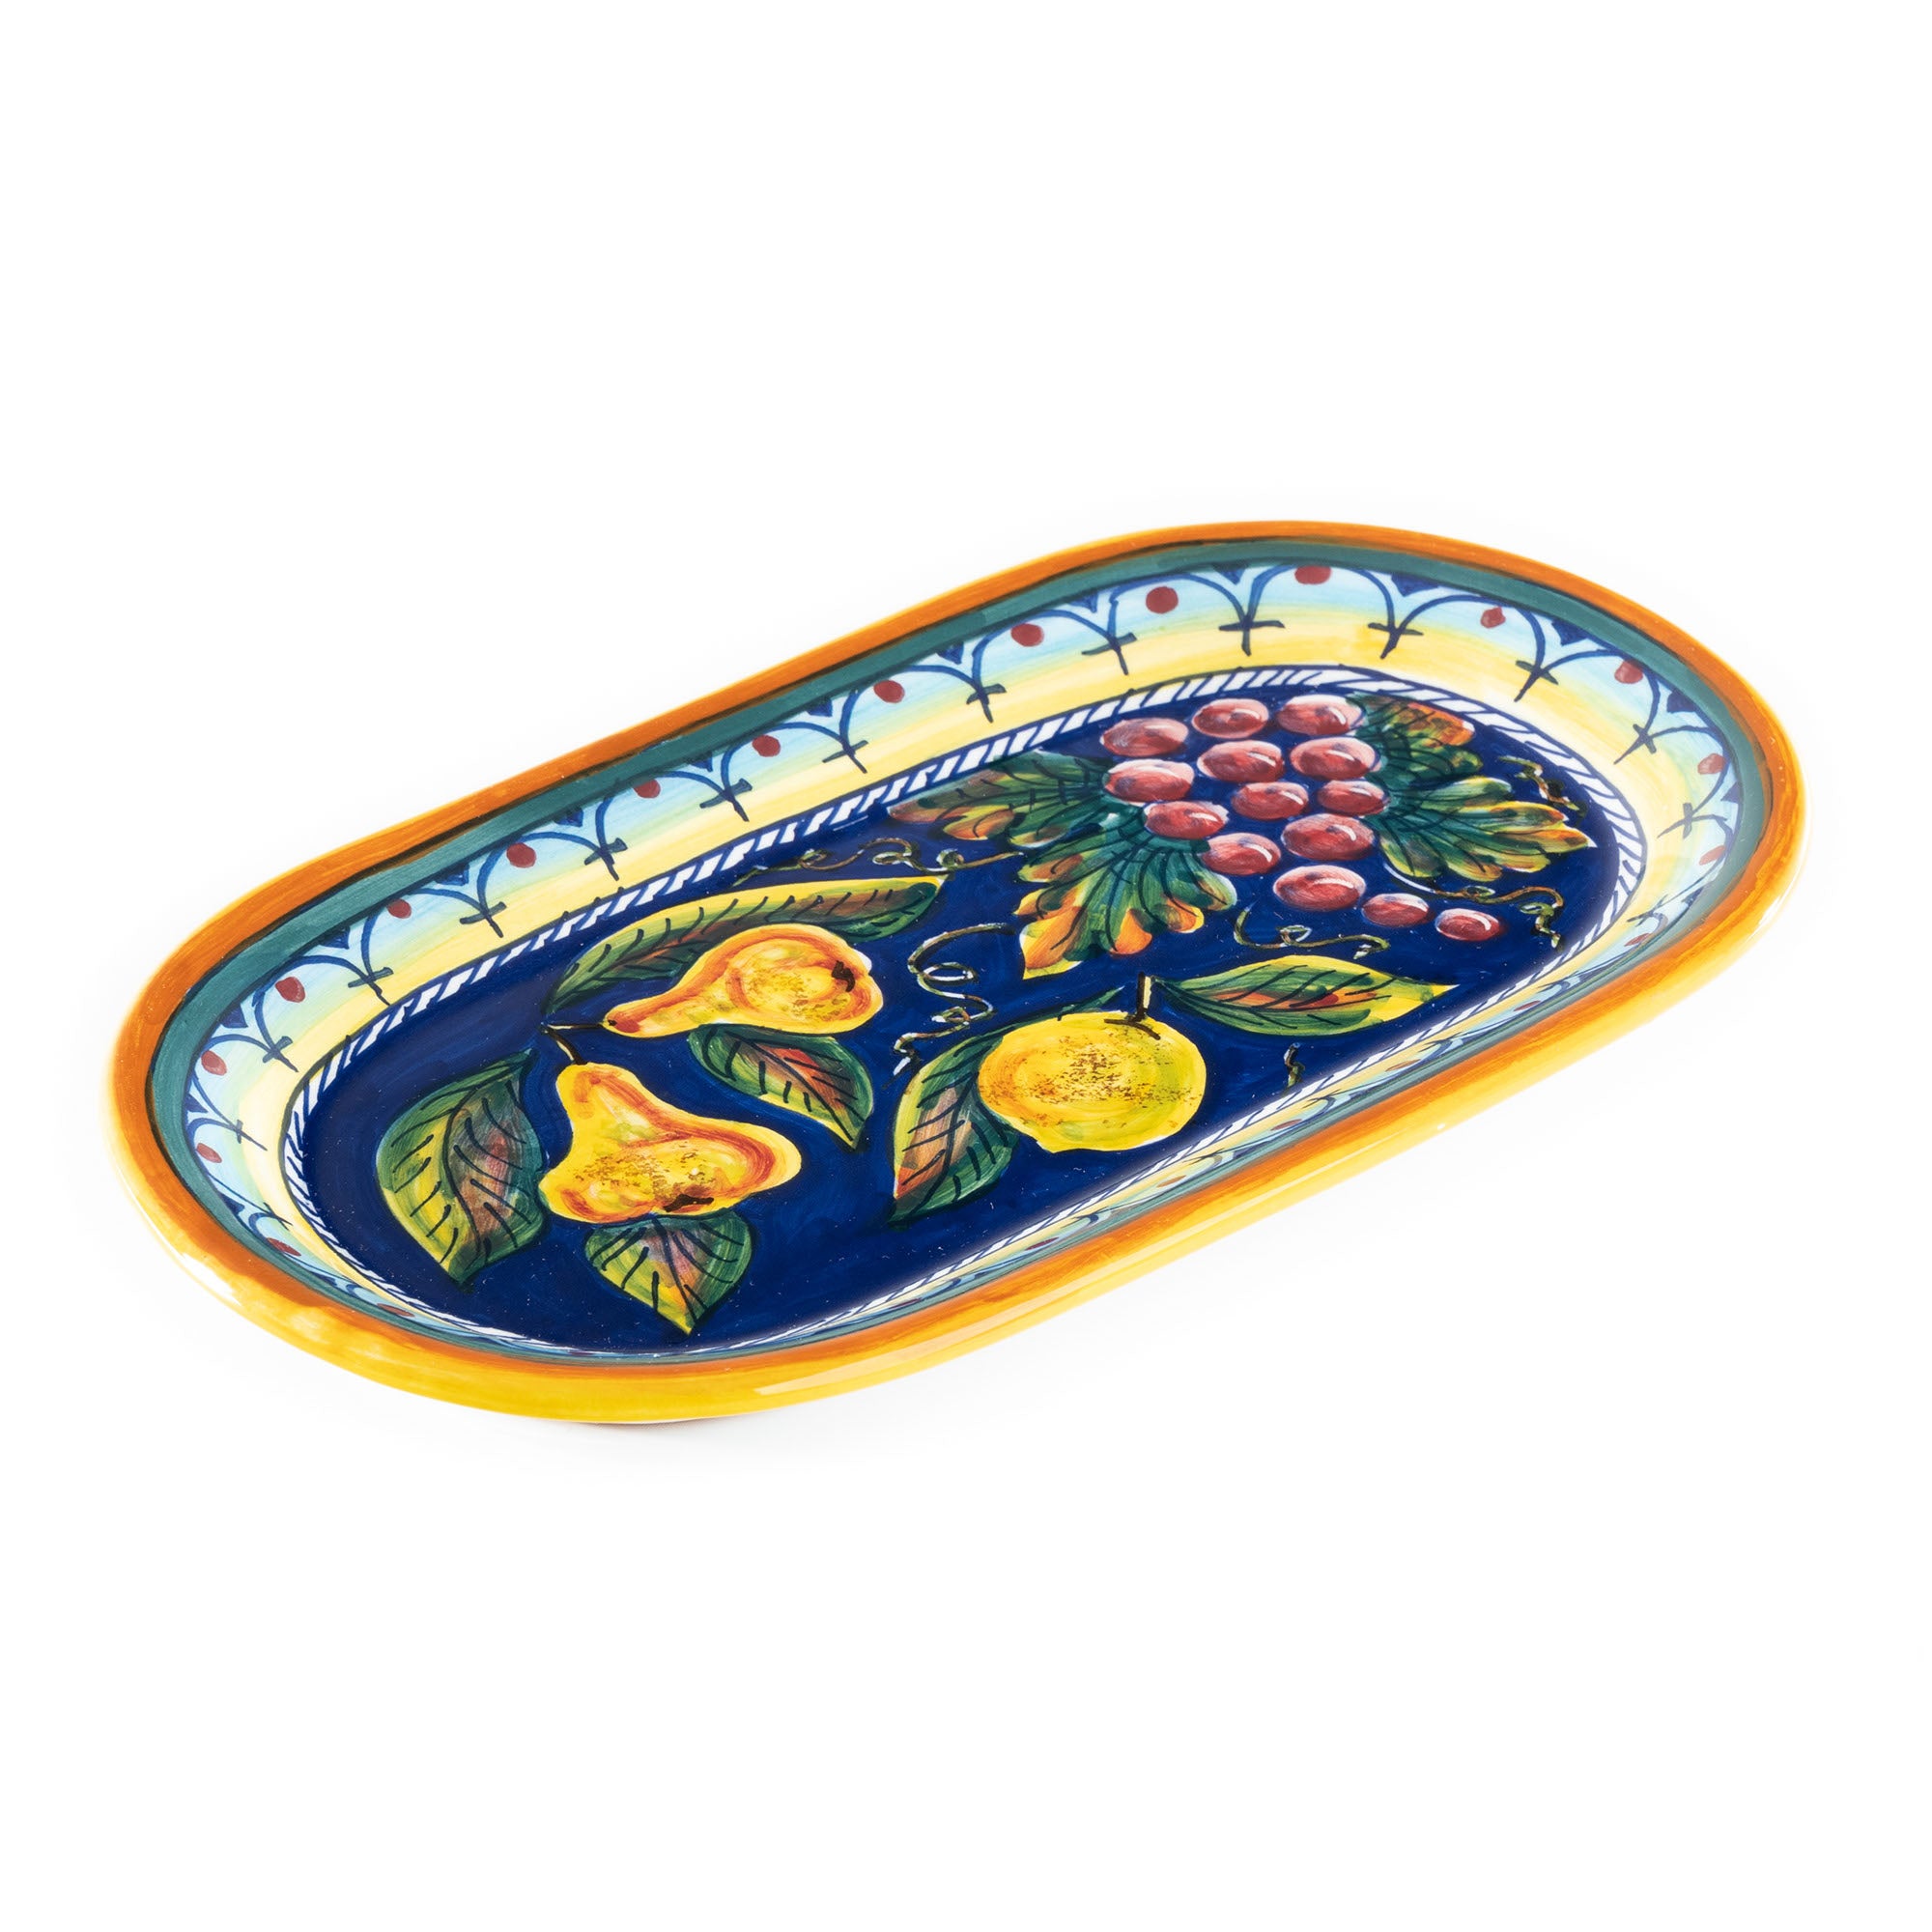 Collectible Majolica Oval Tray B-57, ceramics, pottery, italian design, majolica, handmade, handcrafted, handpainted, home decor, kitchen art, home goods, deruta, majolica, Artisan, treasures, traditional art, modern art, gift ideas, style, SF, shop small business, artists, shop online, landmark store, legacy, one of a kind, limited edition, gift guide, gift shop, retail shop, decorations, shopping, italy, home staging, home decorating, home interiors